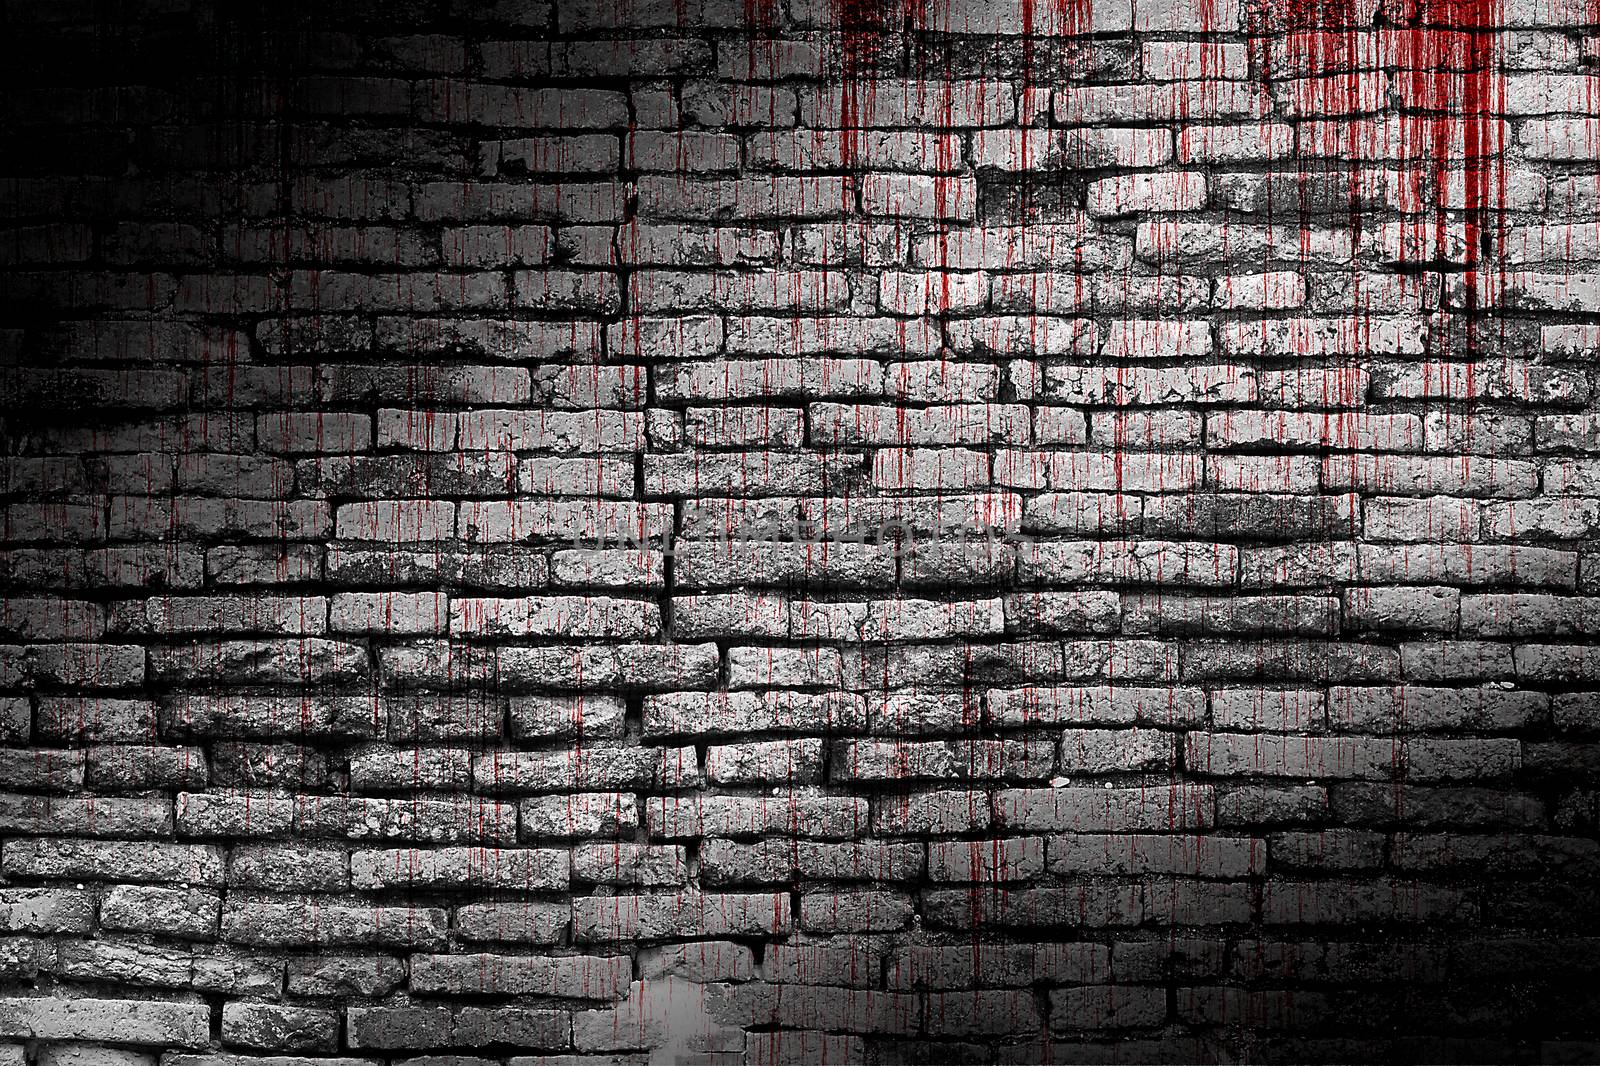 bloody wall  in the dark for horror content and halloween festival.